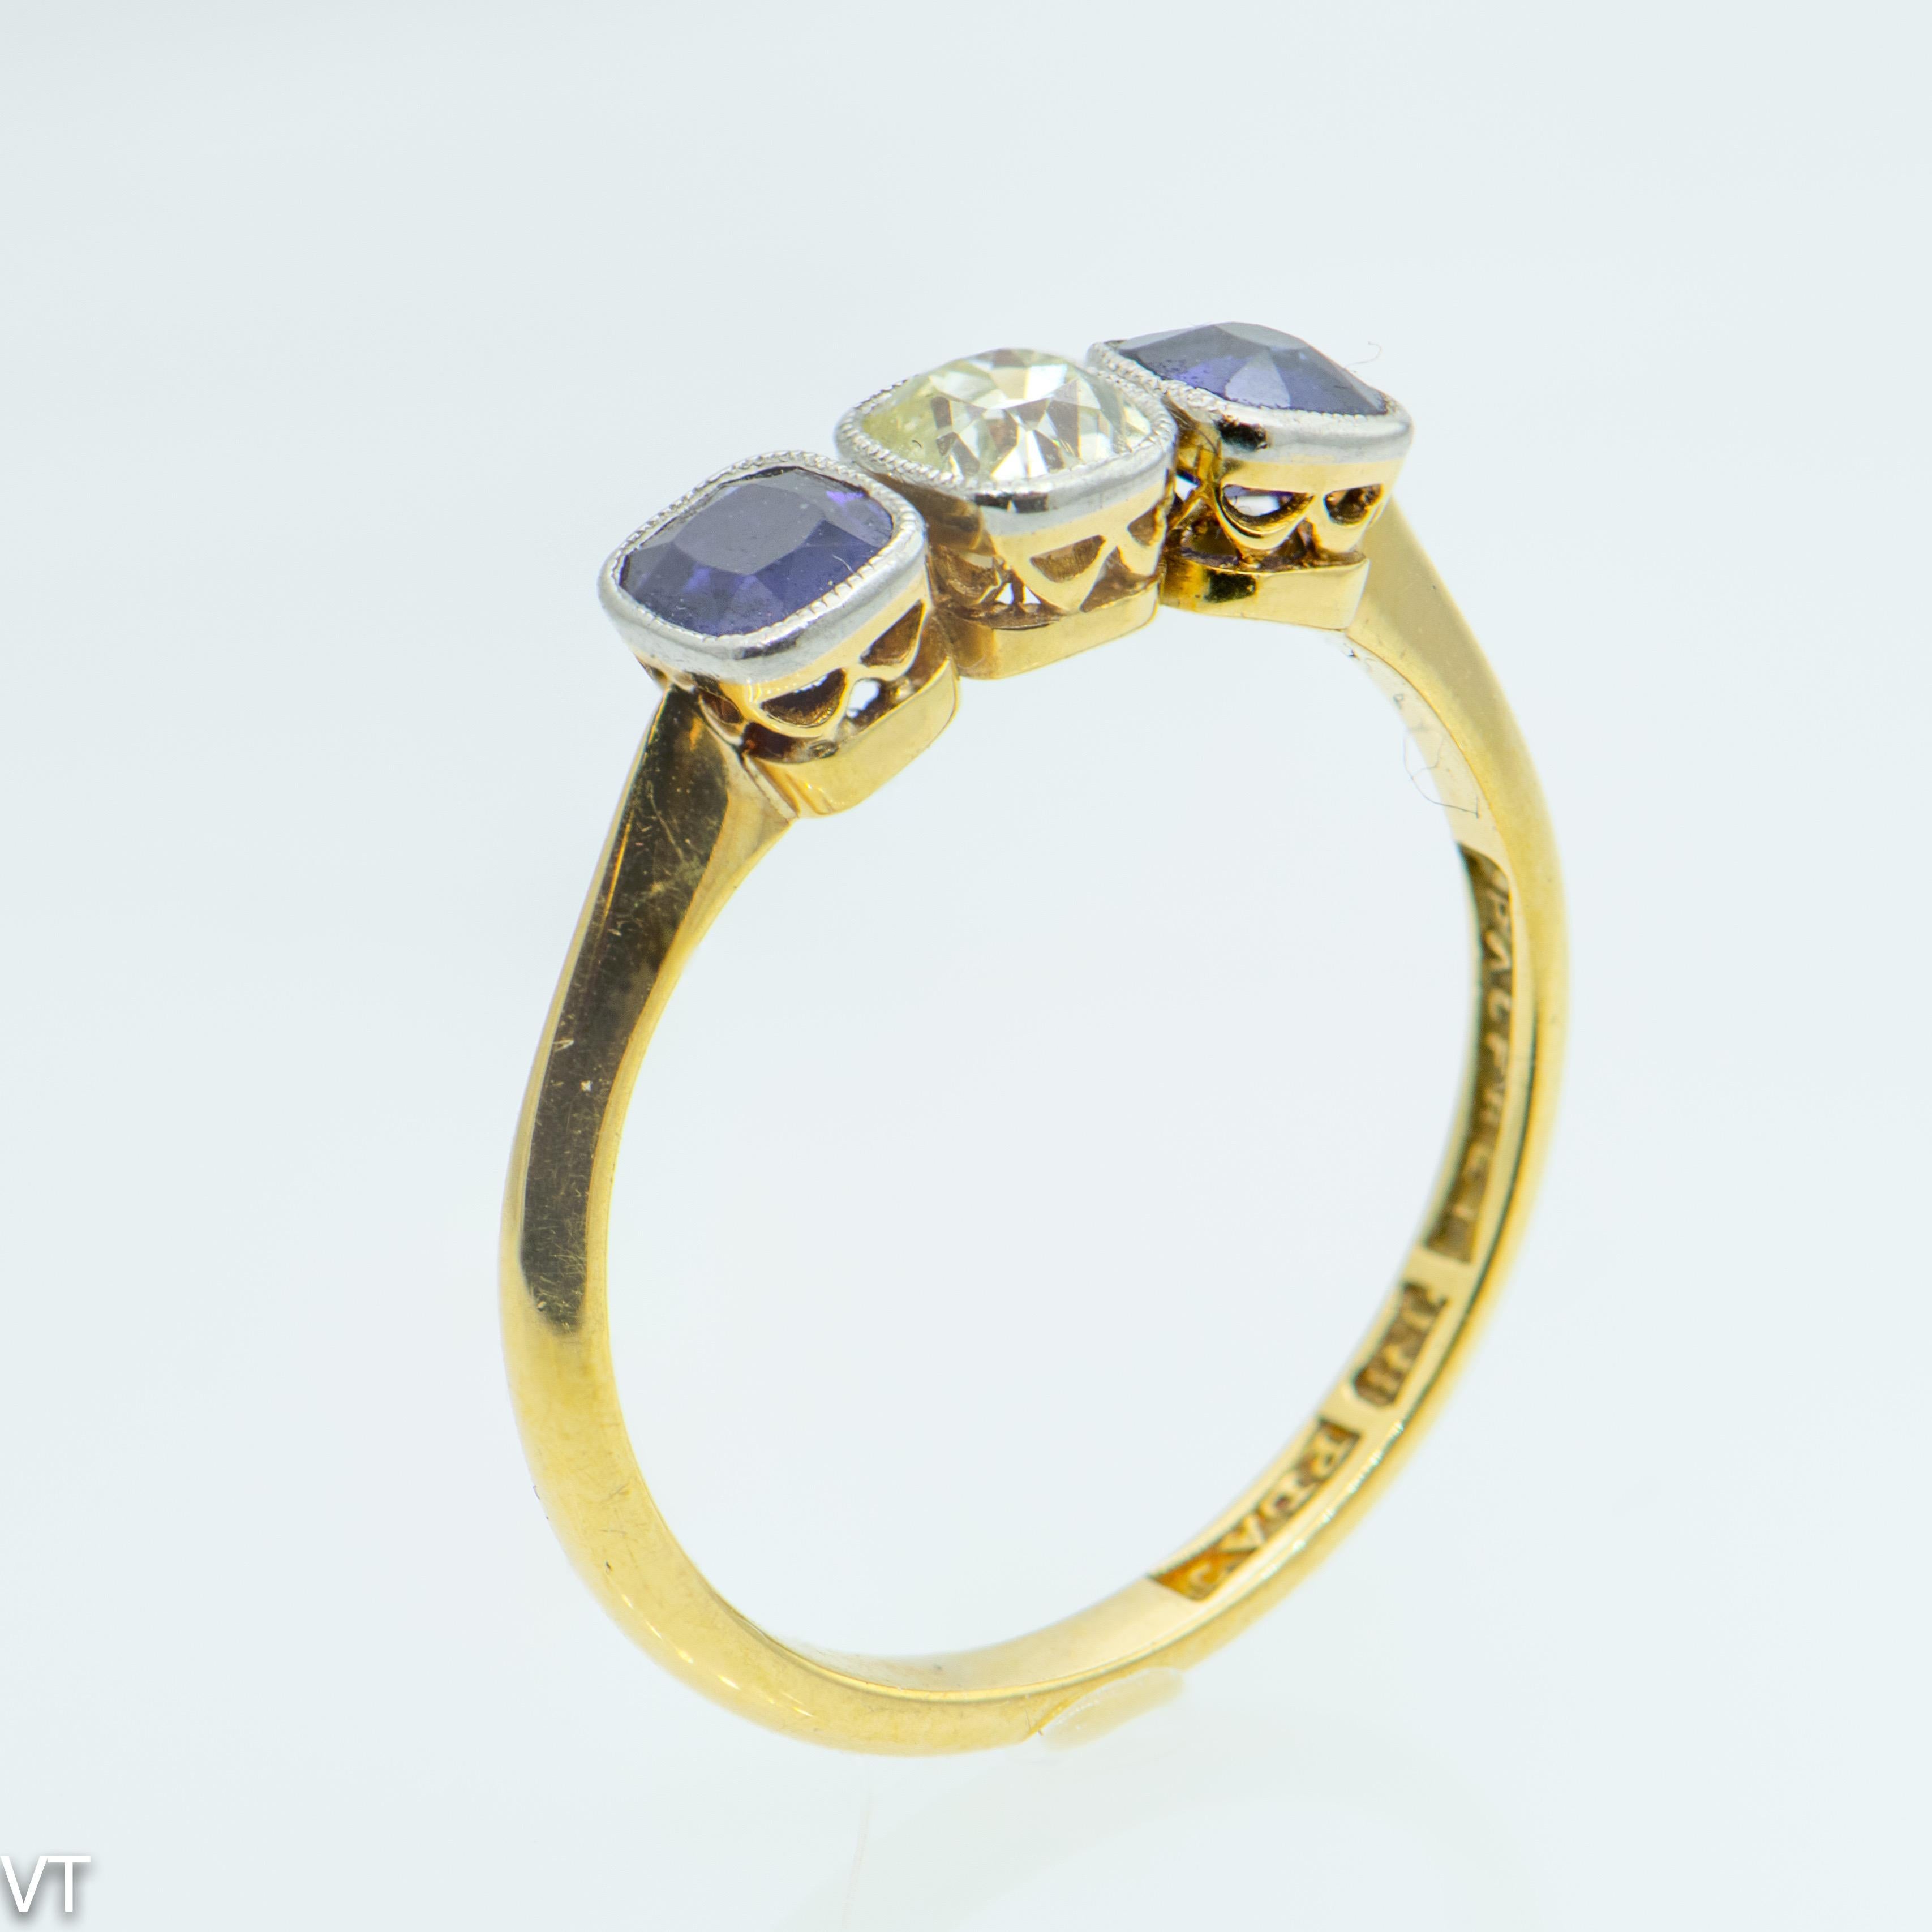 Art nouveau 18 carat Yellow gold ring with one cushion old-cut Diamond, estimated 0.45 carats
and two cushion old-cut Australian Sapphires, total estimated 0.90 carats.
Stones are set in platinum setting.
Size N (US size 6 3/4),
Weight of the ring